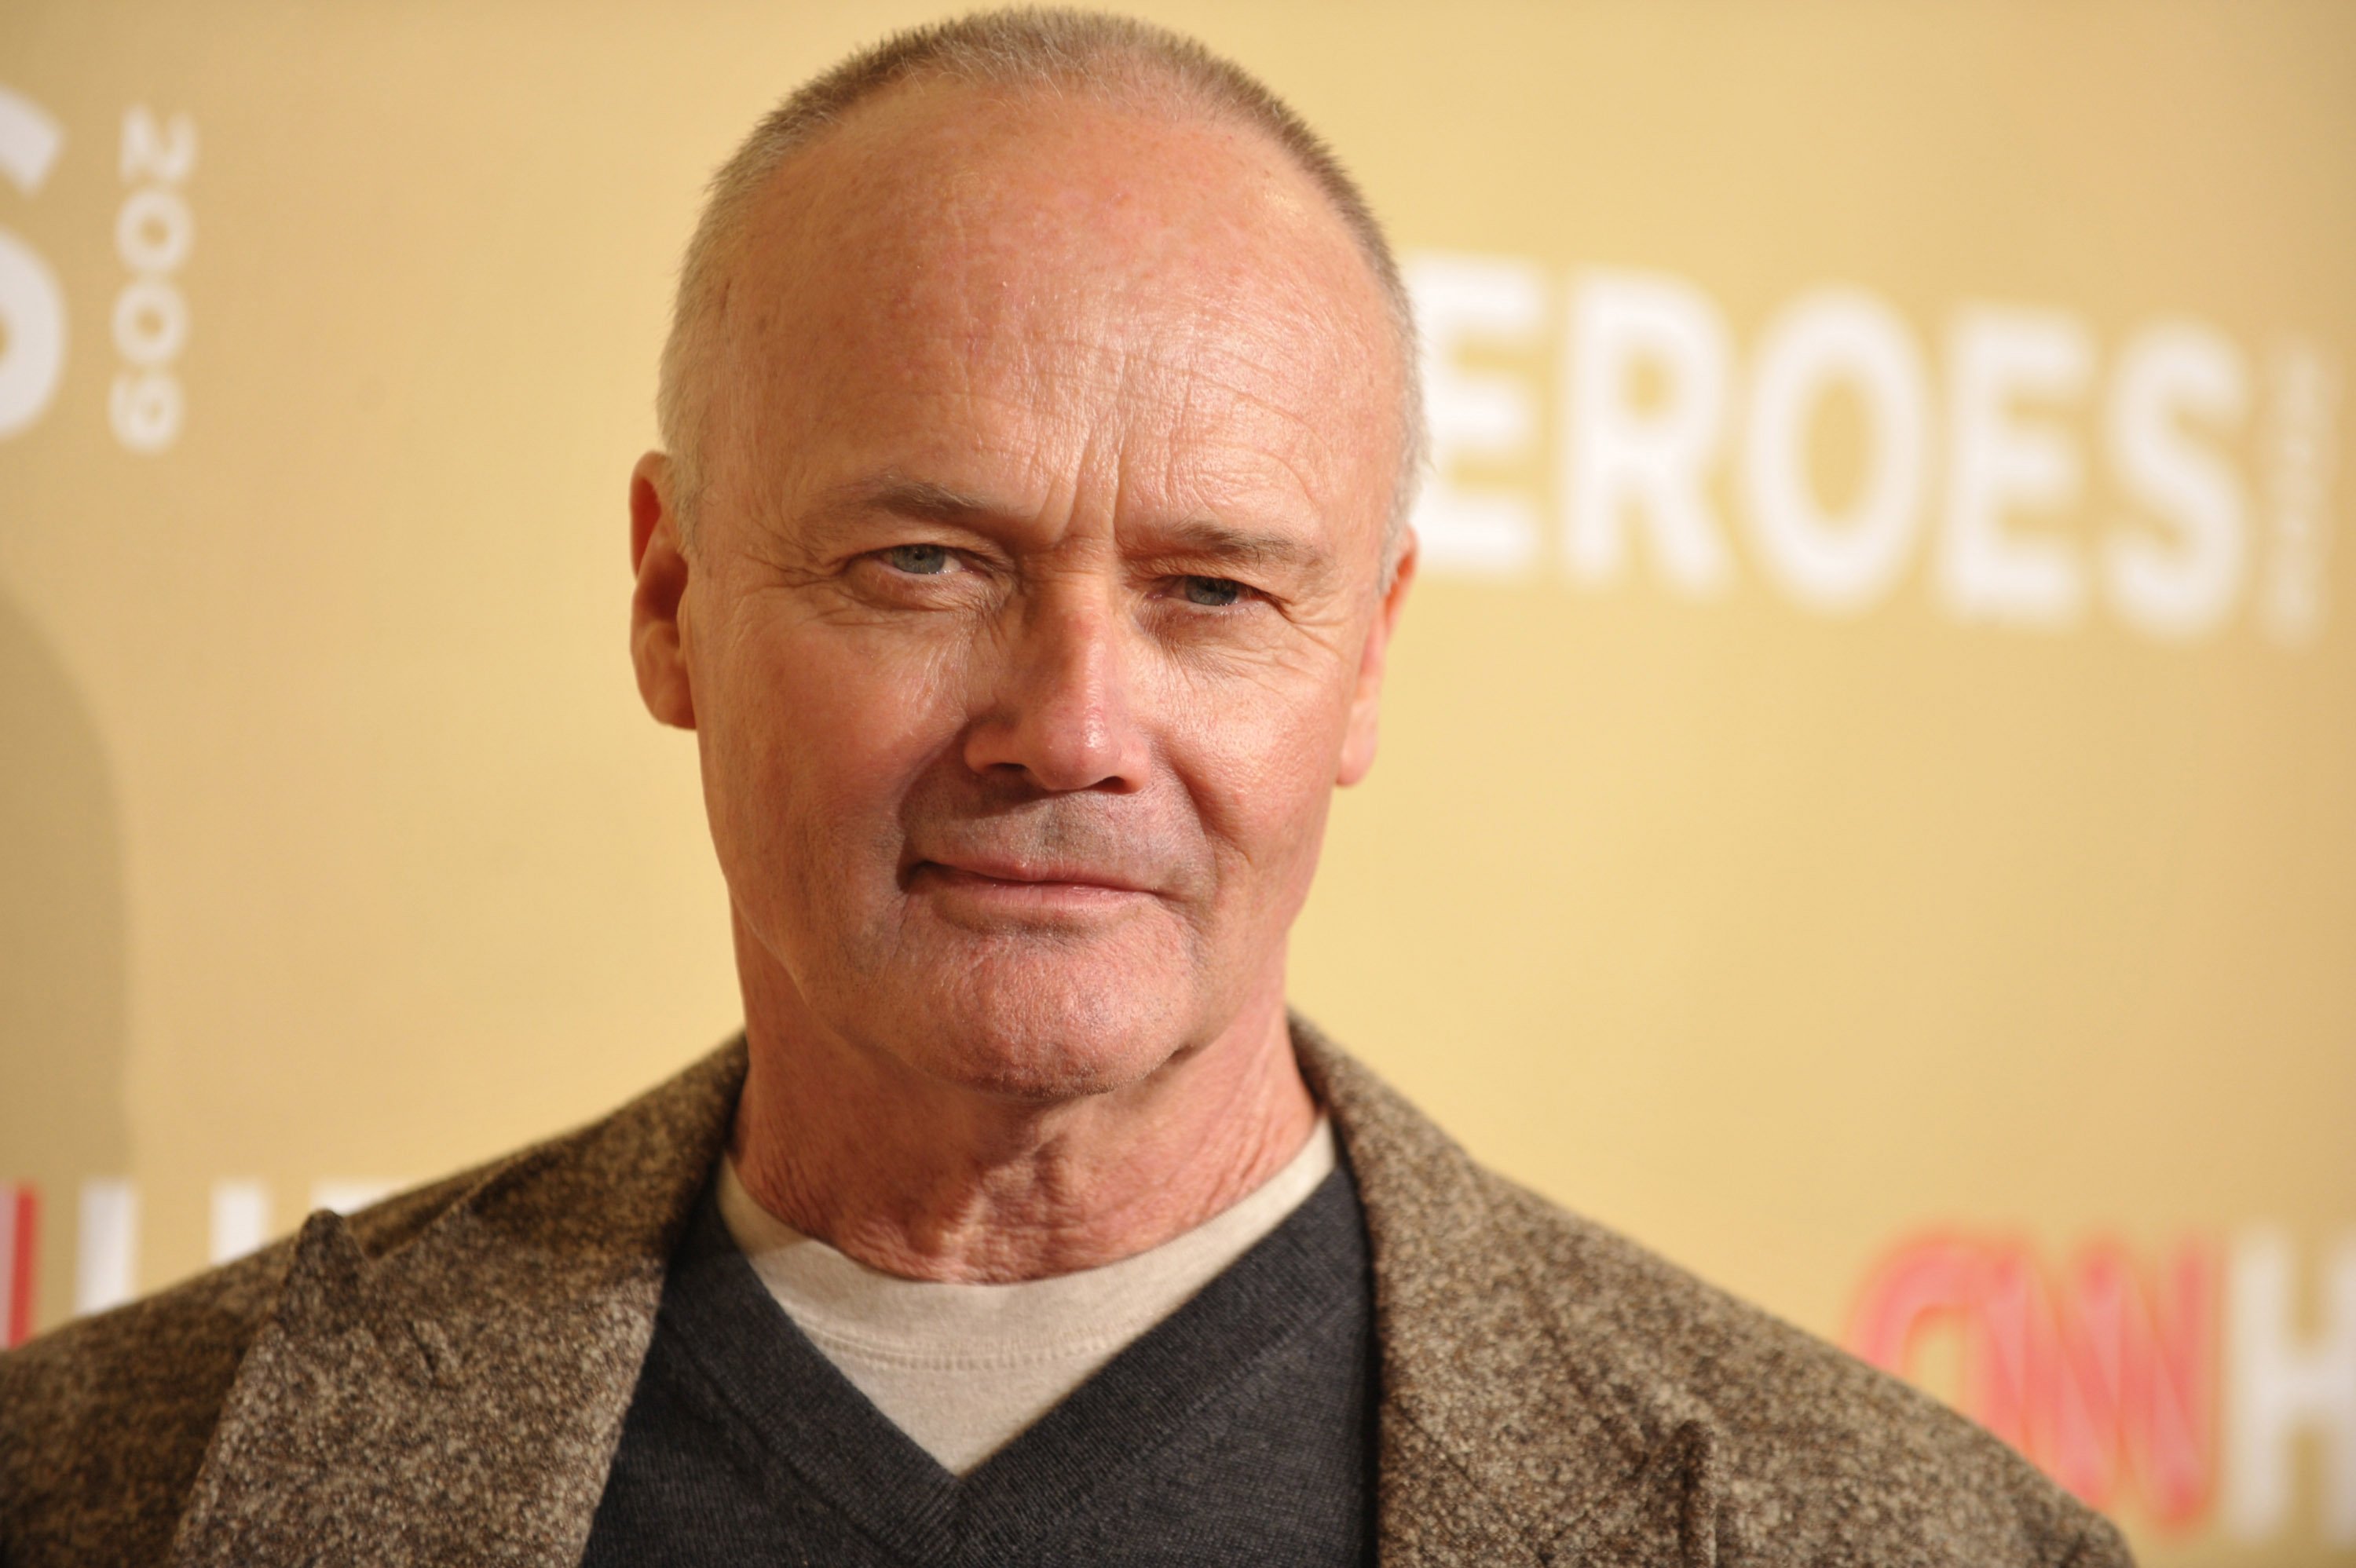 Creed Bratton from 'The Office' standing in front of a yellow backdrop wearing a brown jacket and navy shirt at the 2009 CNN Heroes Awards.